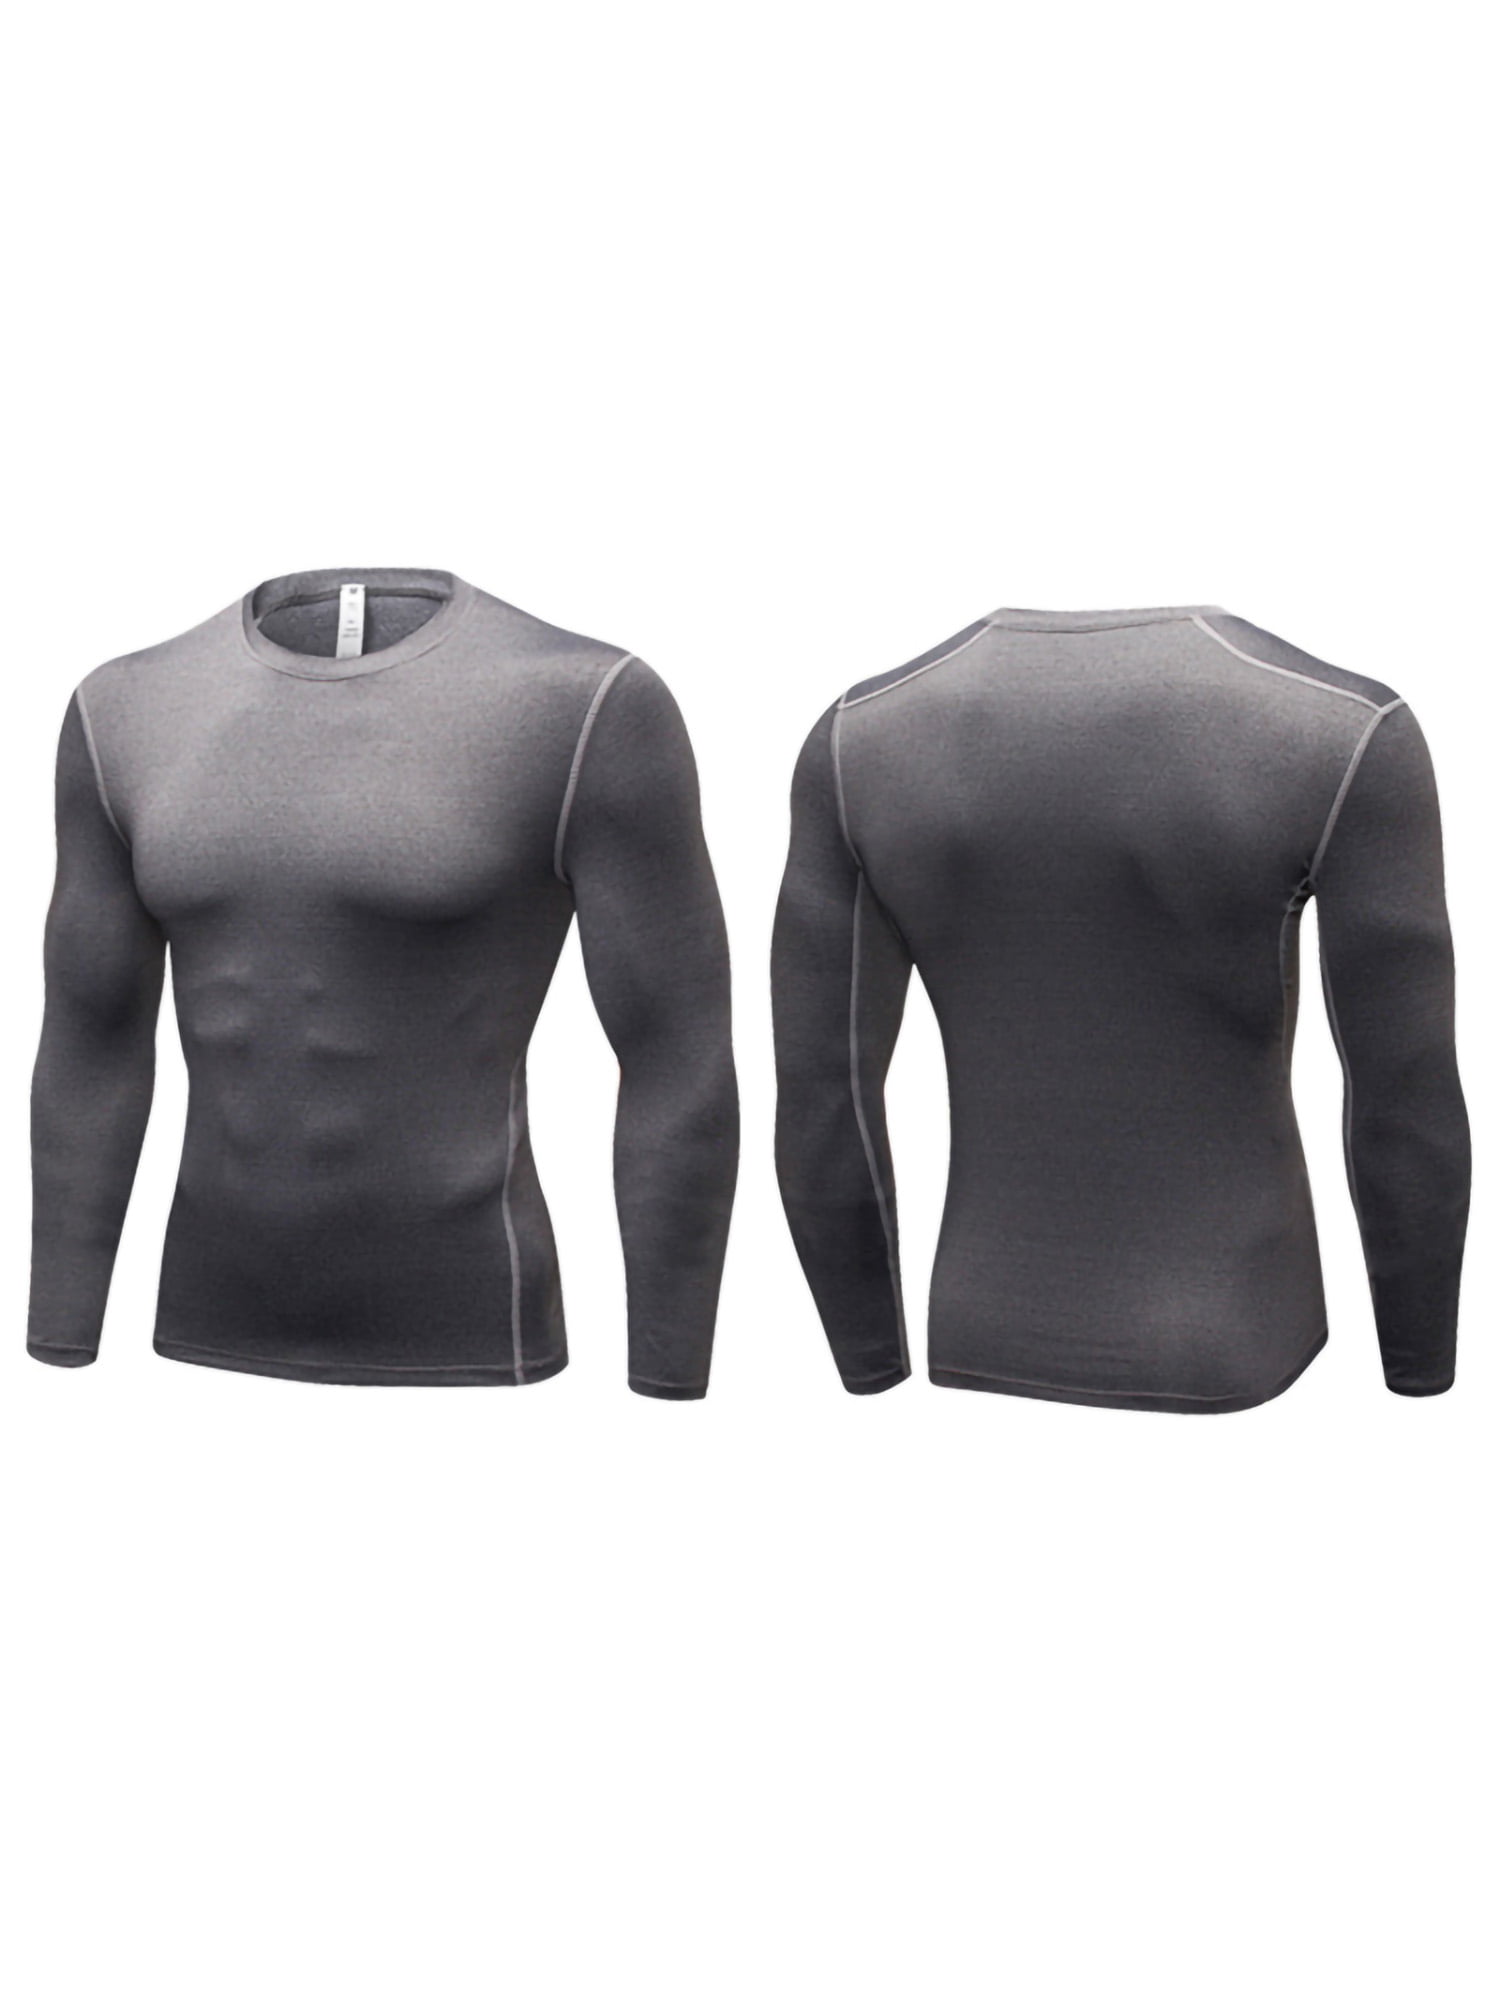 Glonme Mens Muscle Tops Long Sleeve Compression Shirts Baselayer